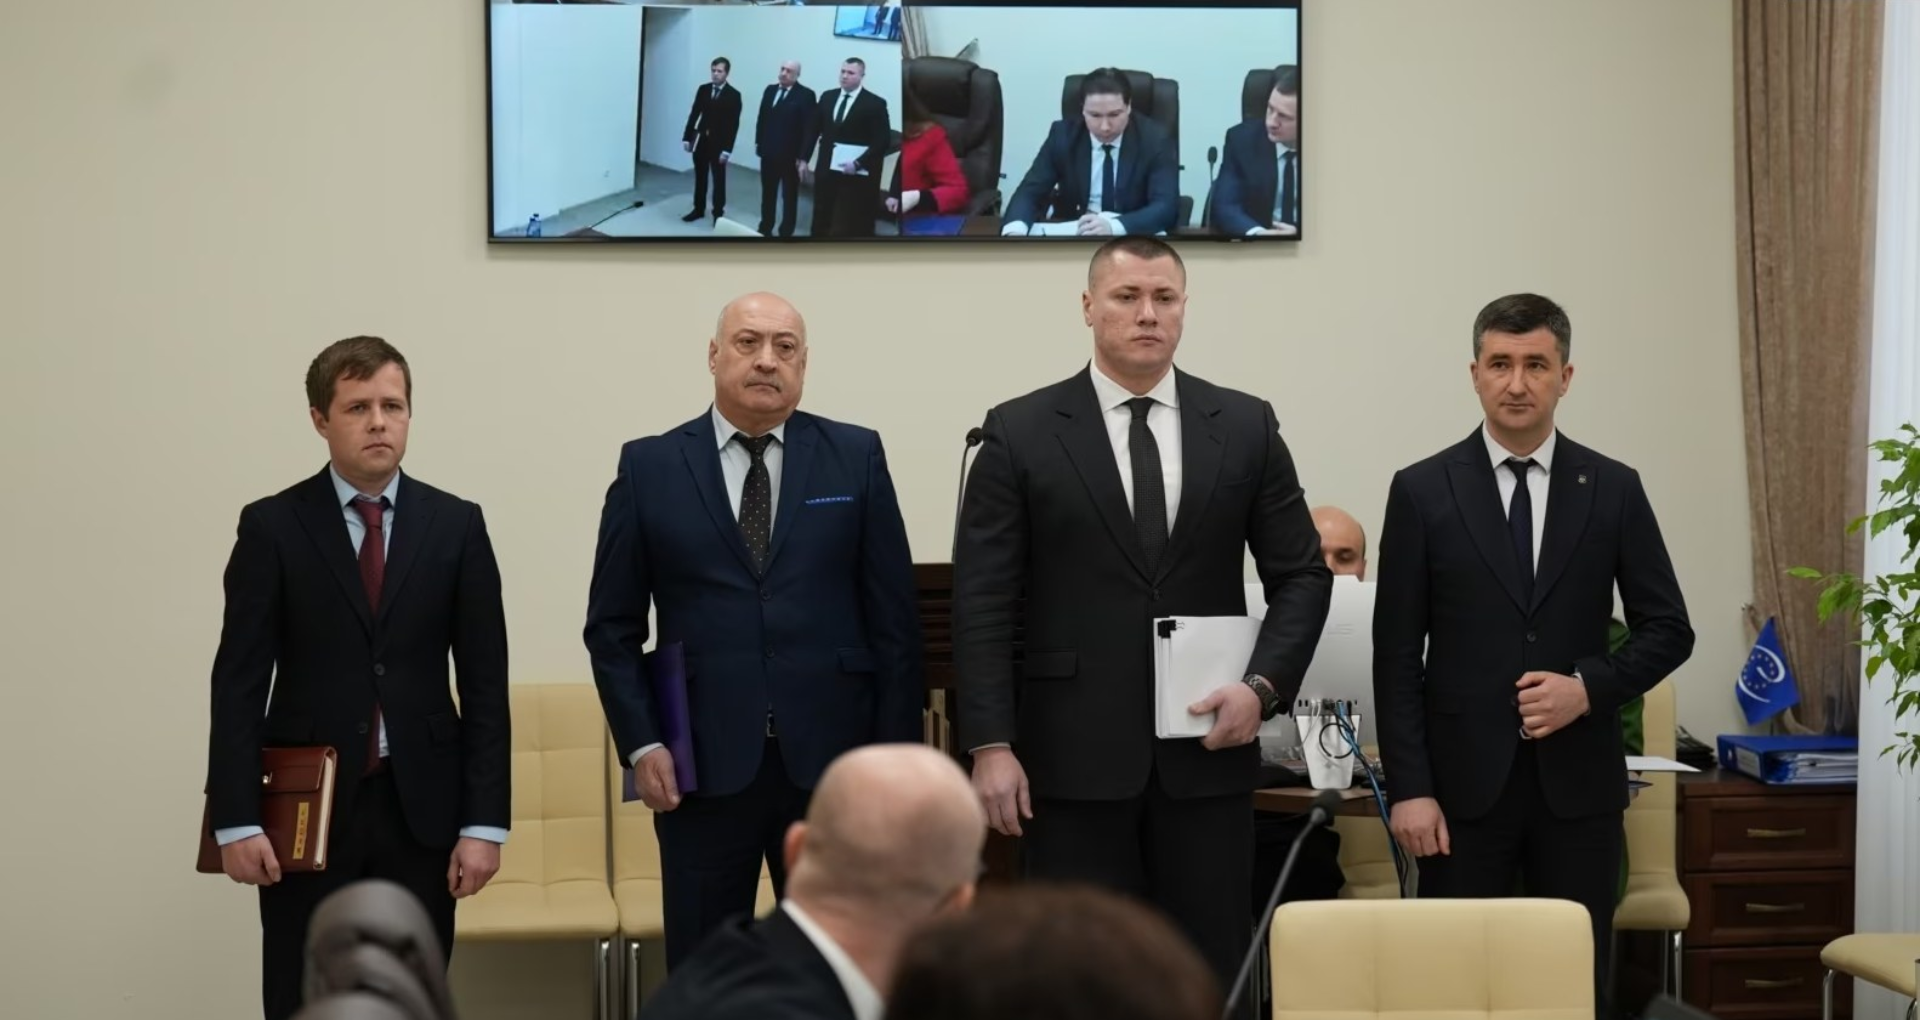 21 candidates for membership of the Supreme Council of Magistracy and the Superior Council of Prosecutors will be re-evaluated